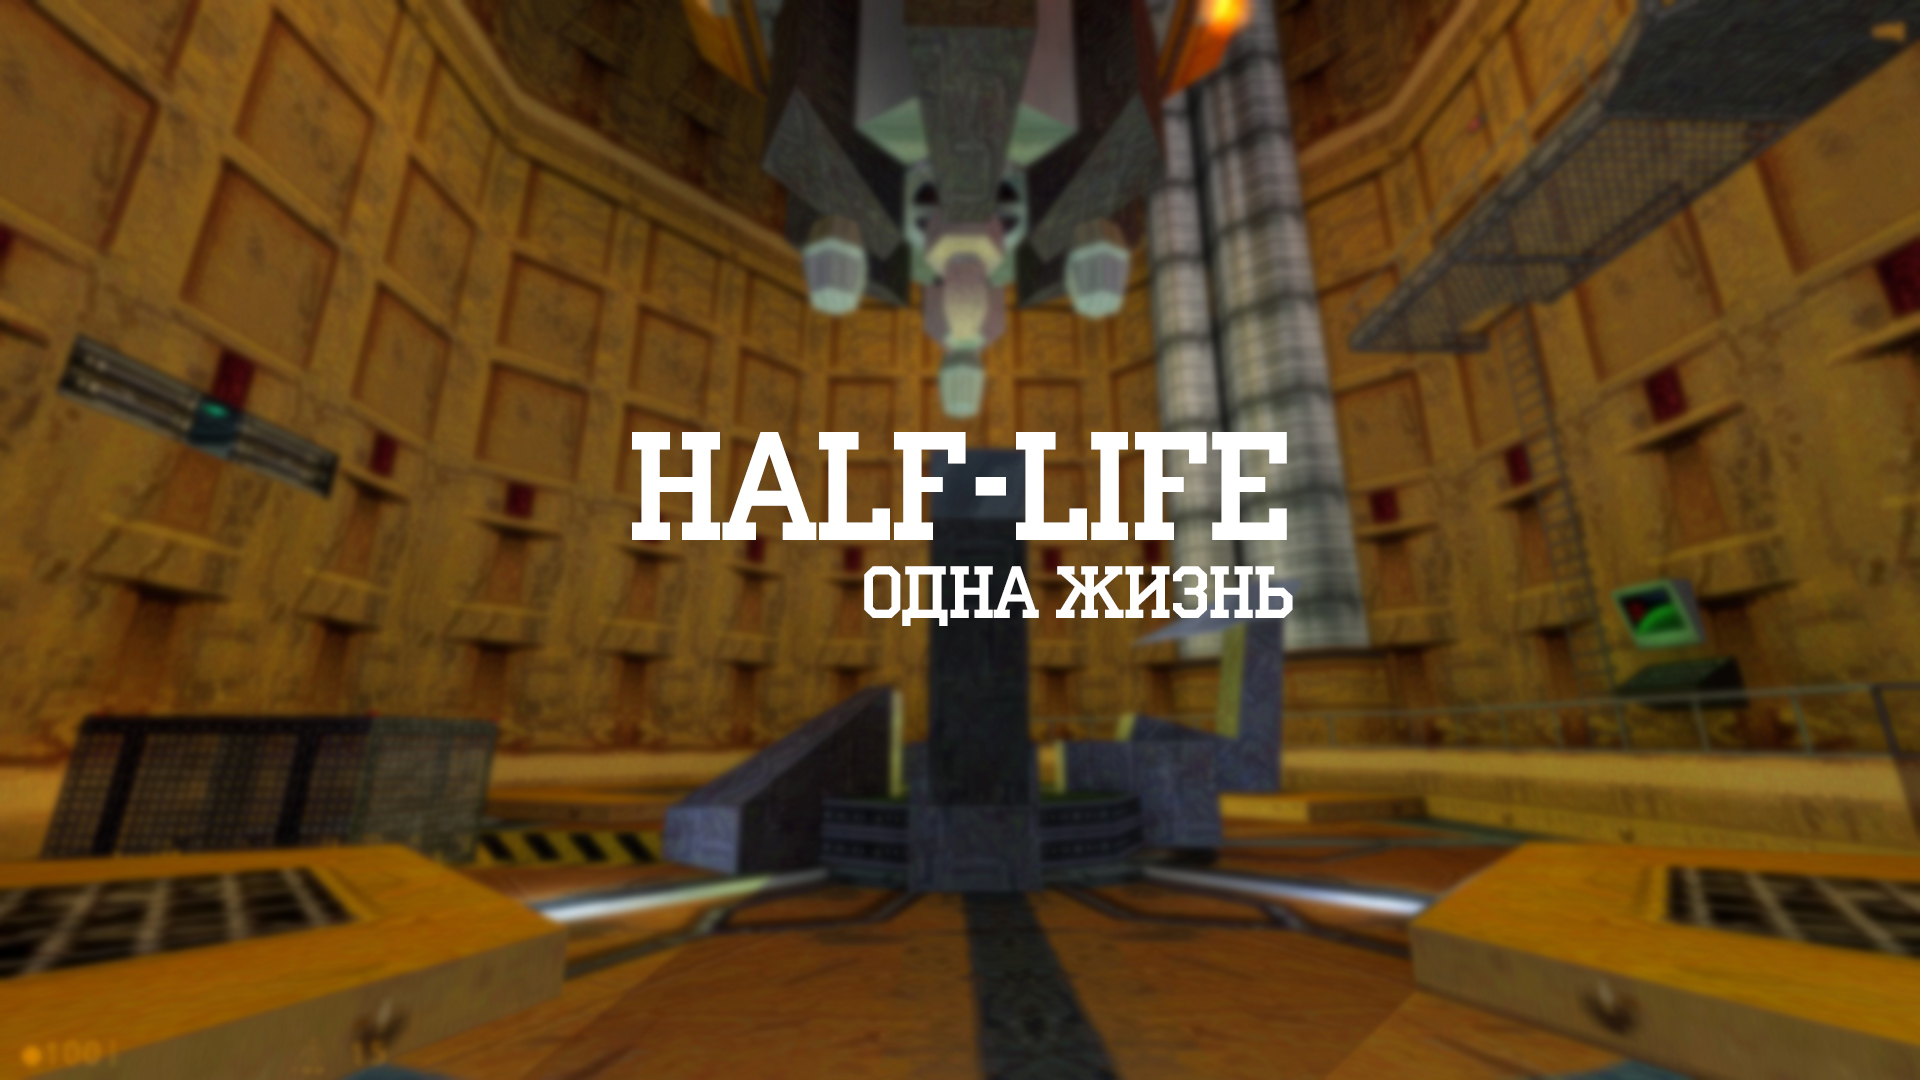 Please type in the cd key displayed on the half life cd case фото 84